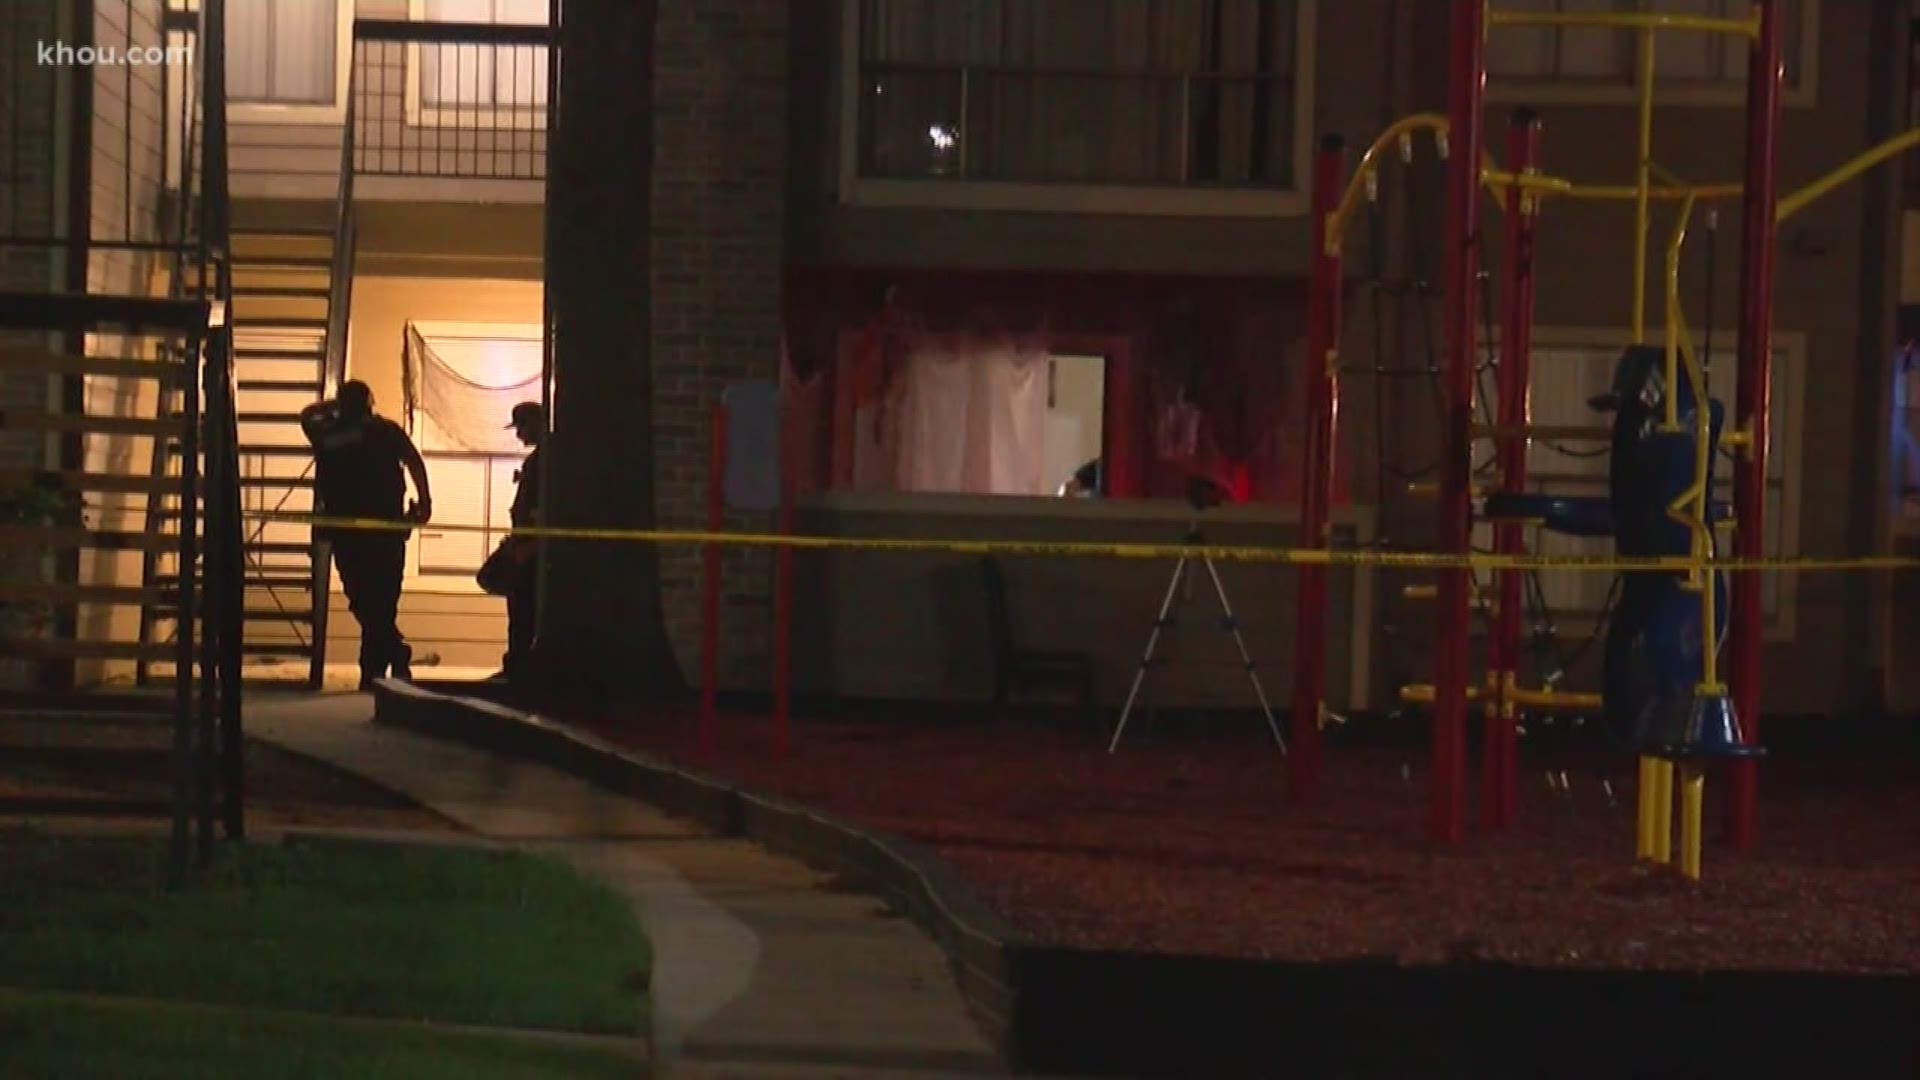 Deputies are searching for four male suspects after a father was fatally shot during a home invasion in northwest Harris County overnight.